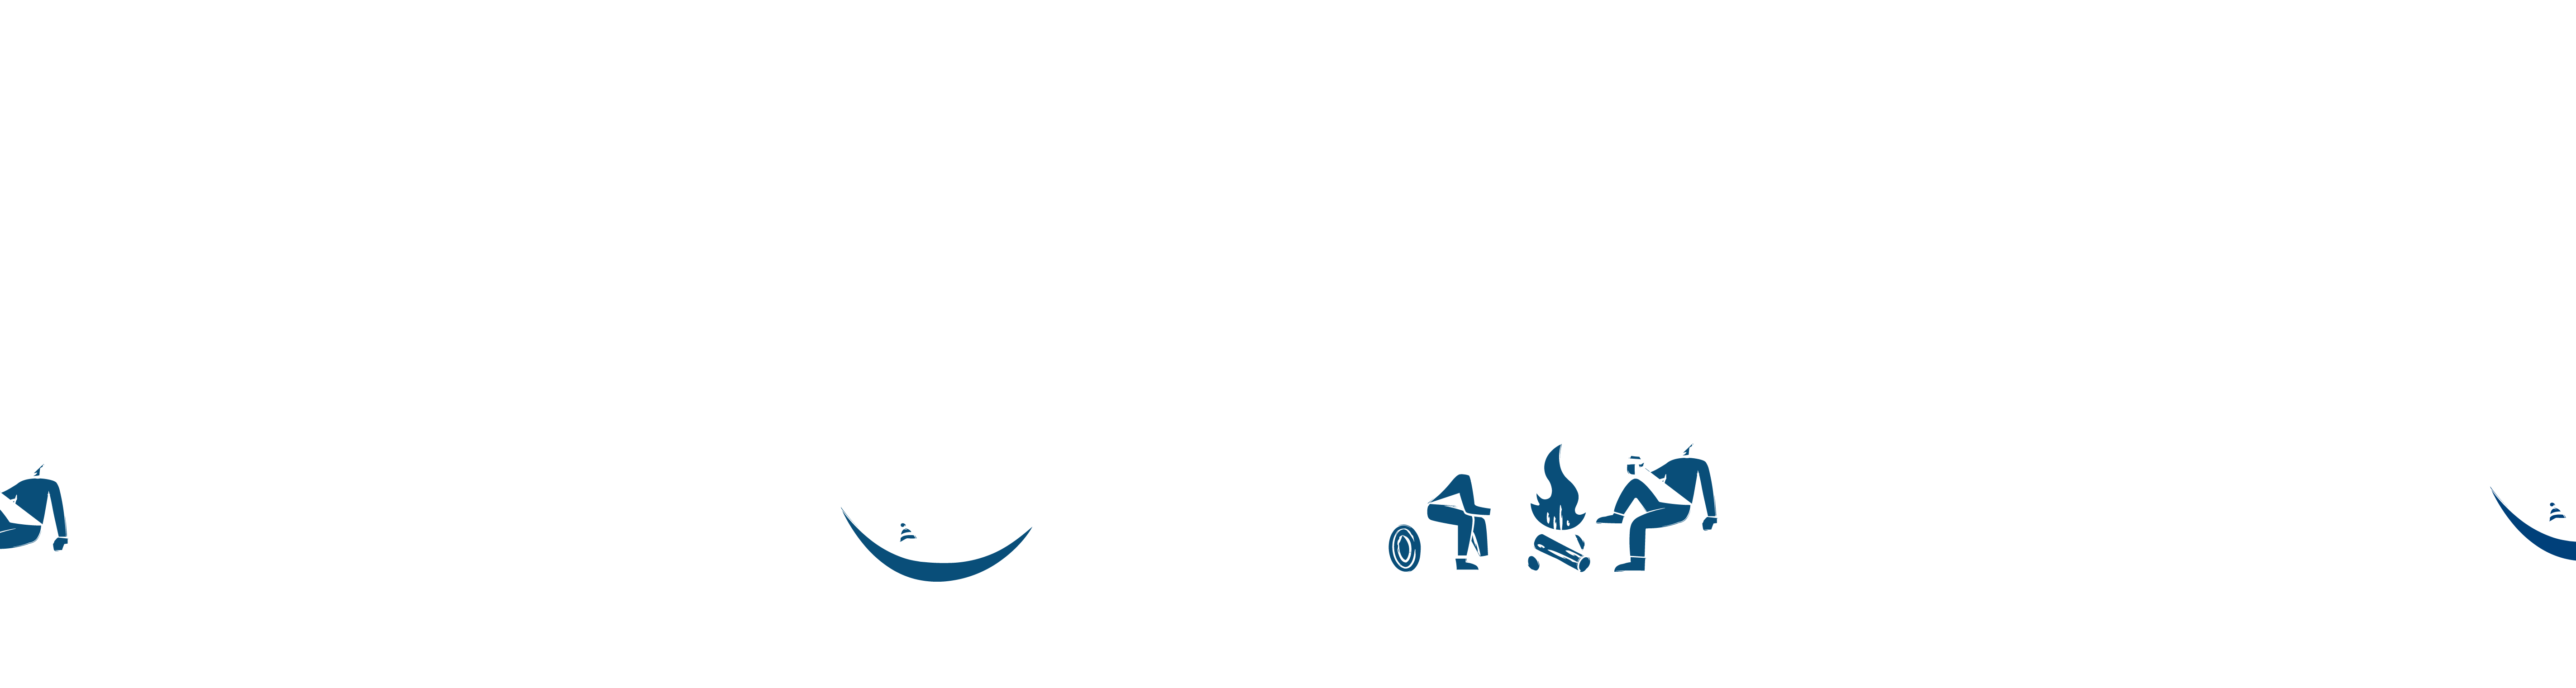 Mountain and campers Graphics